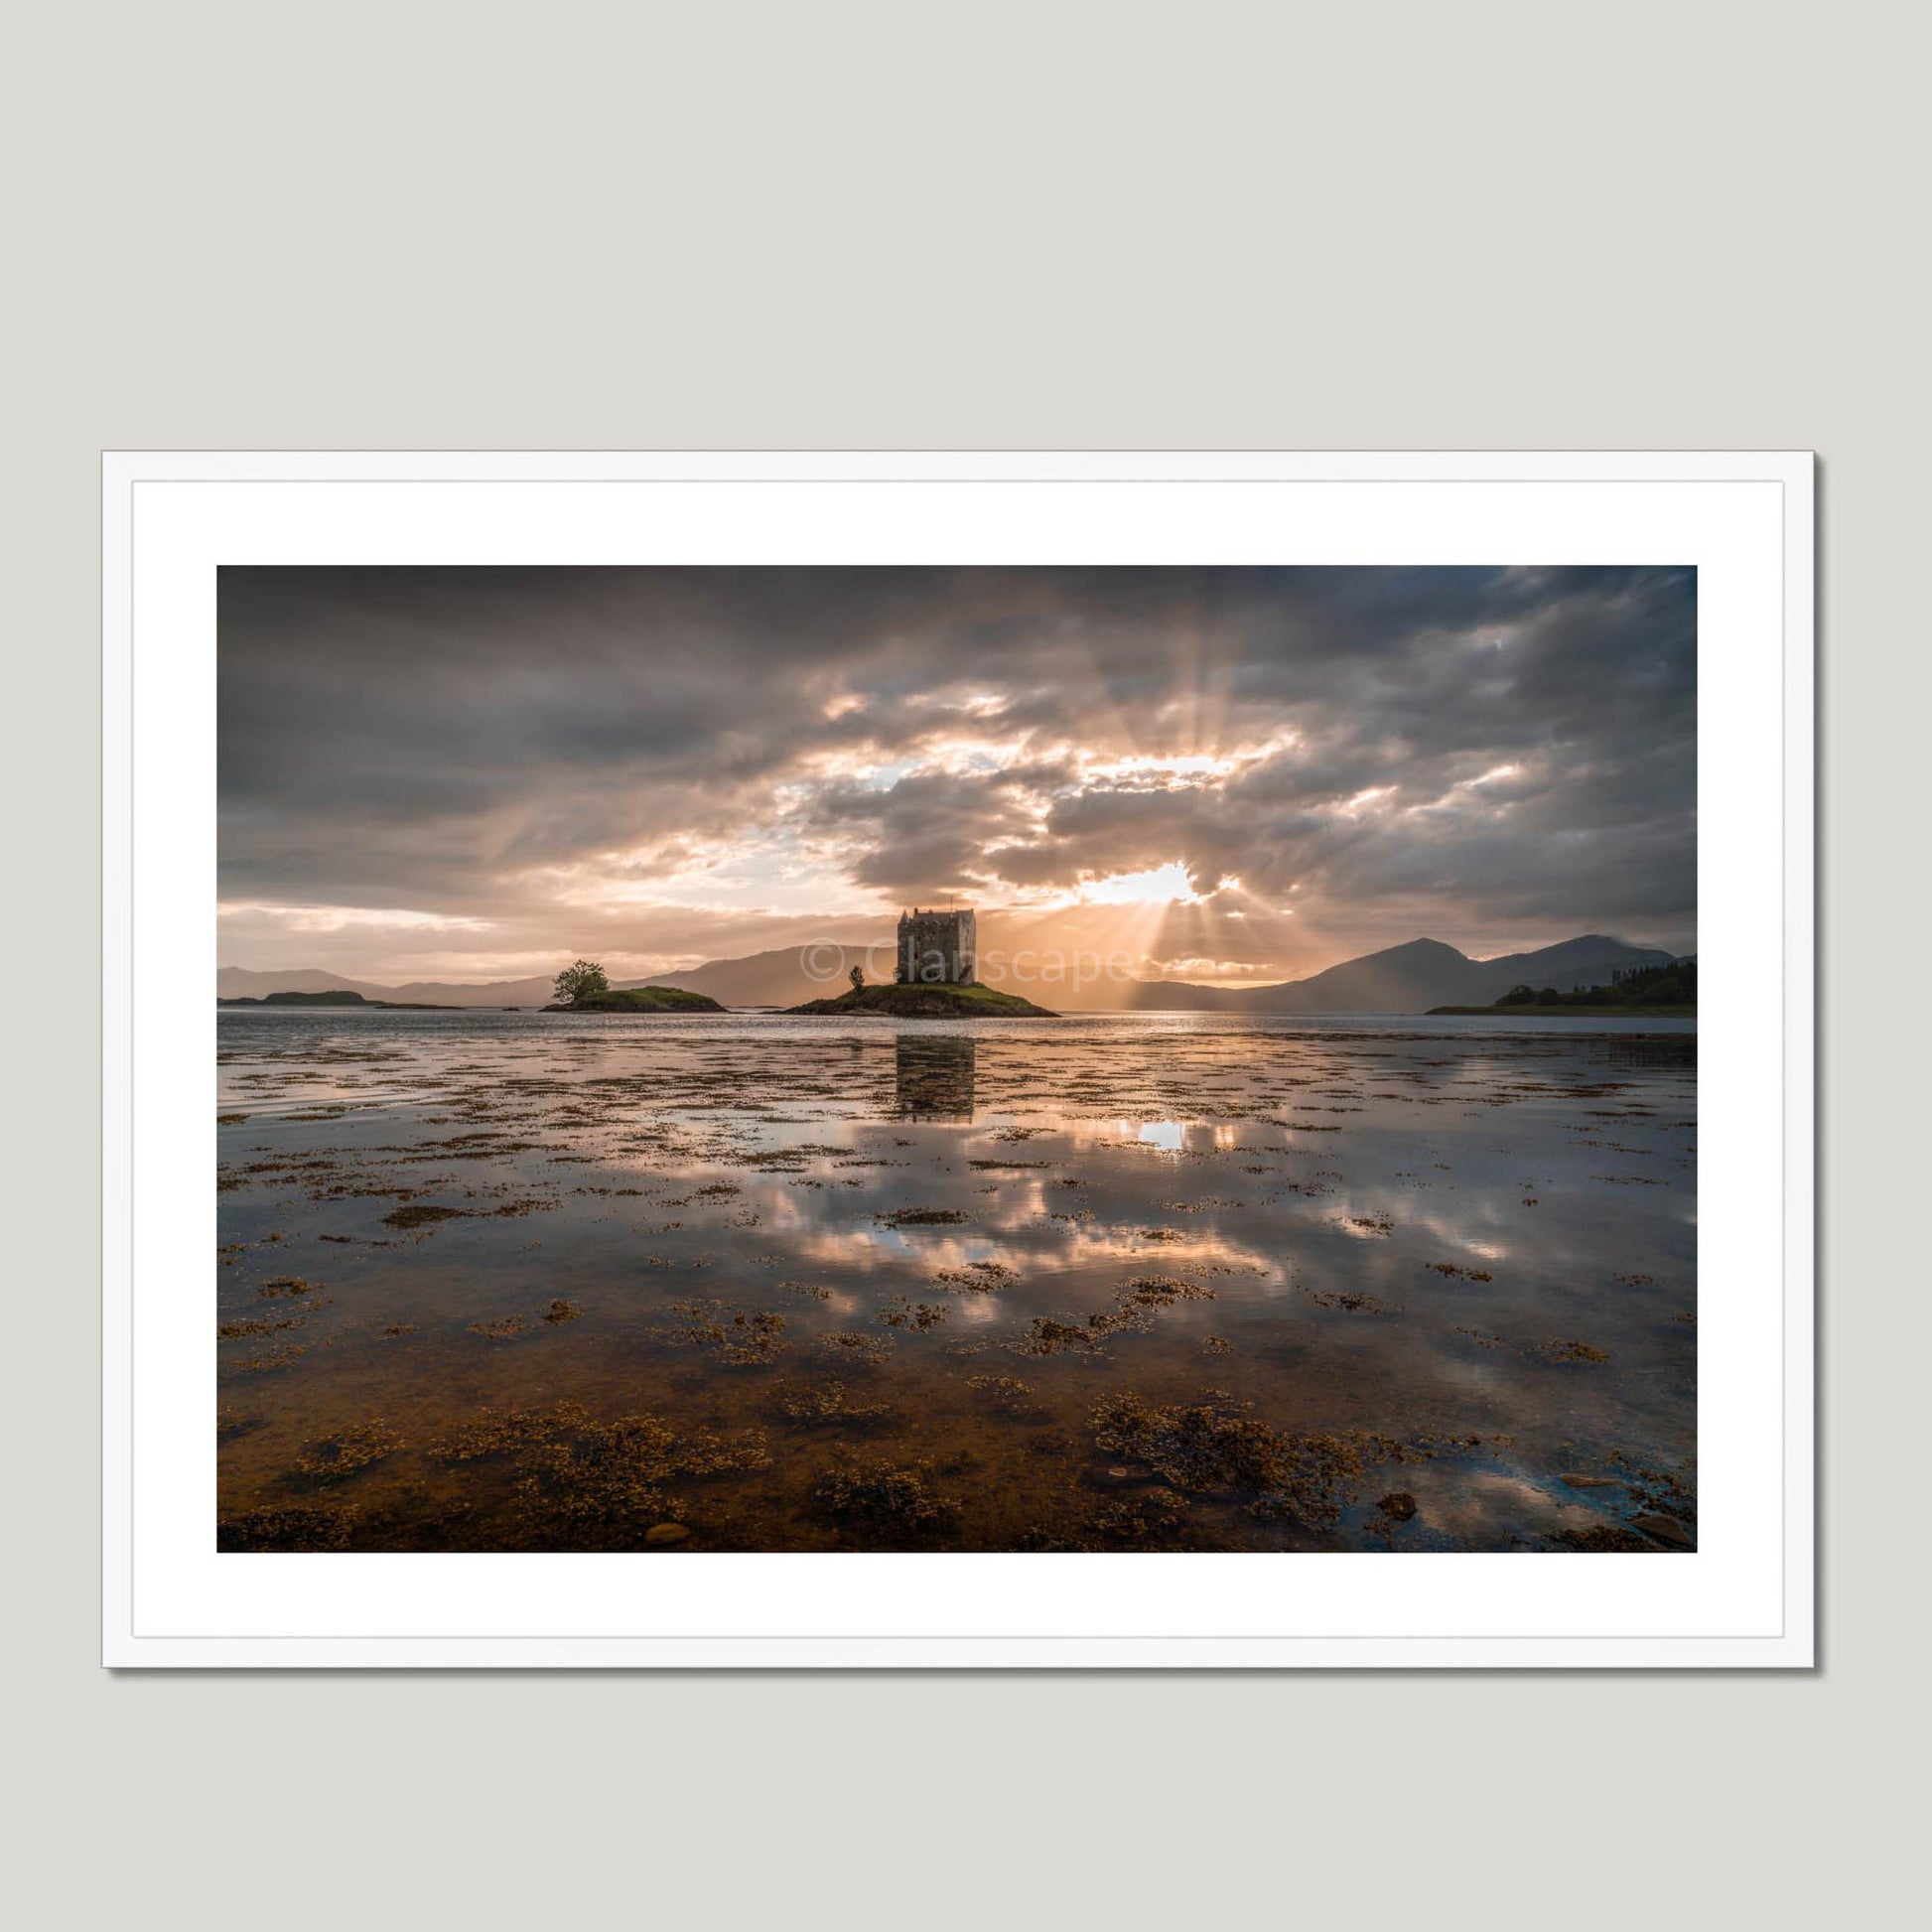 Clan Stewart of Appin - Castle Stalker - Framed & Mounted Photo Print 40"x28" White